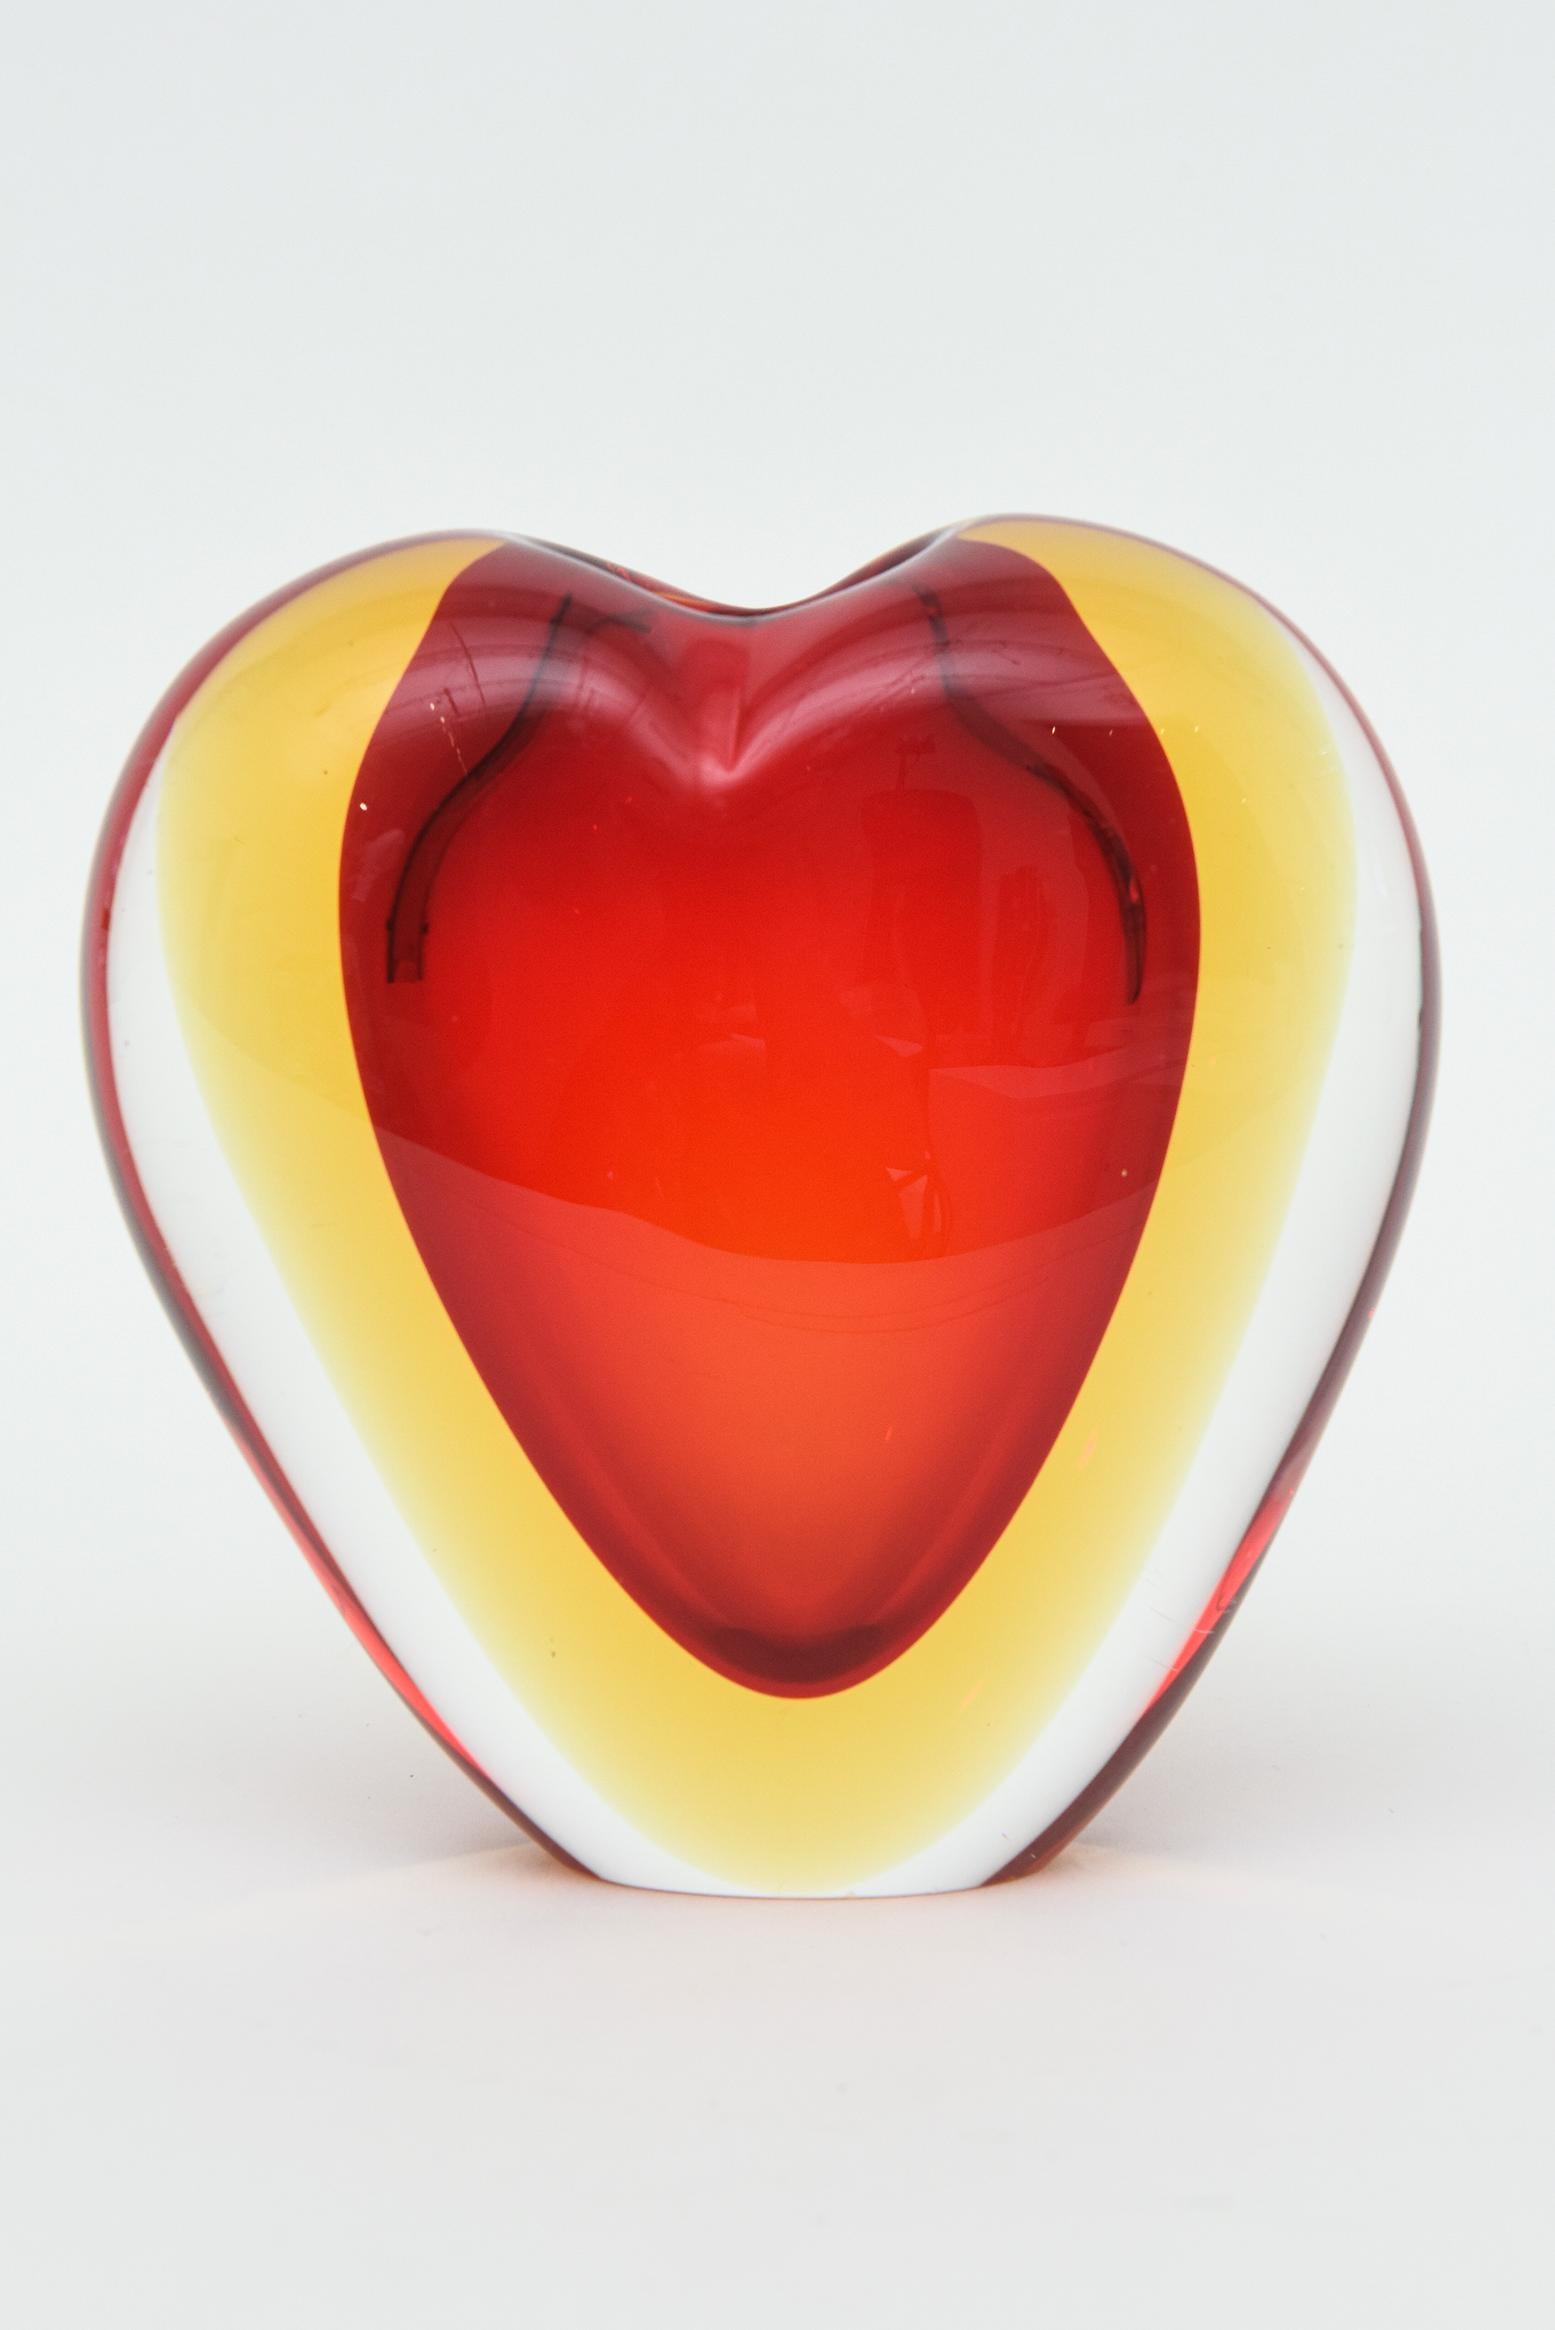 This vintage beautiful Italian Murano glass heart vase or object sculpture is by Antonio da Ros for Cenedese and from the 70's. It is layered sommerso glass in red, yellow then to clear. The shape is a heart and only a few small flowers will fit.